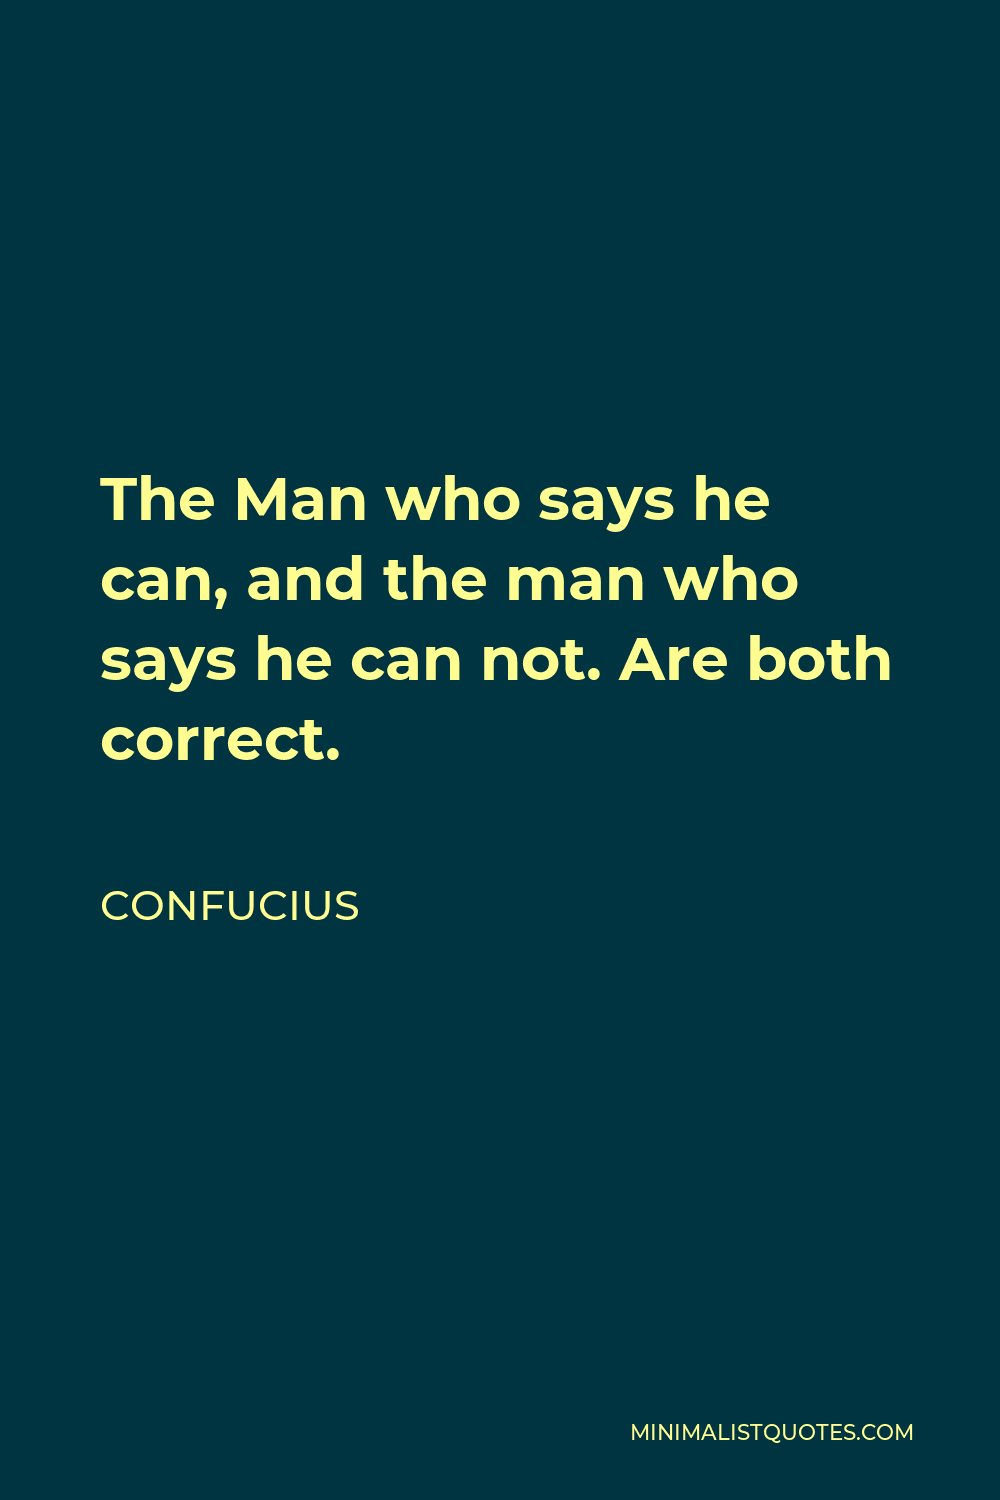 Confucius Quote - The Man who says he can, and the man who says he can not. Are both correct.